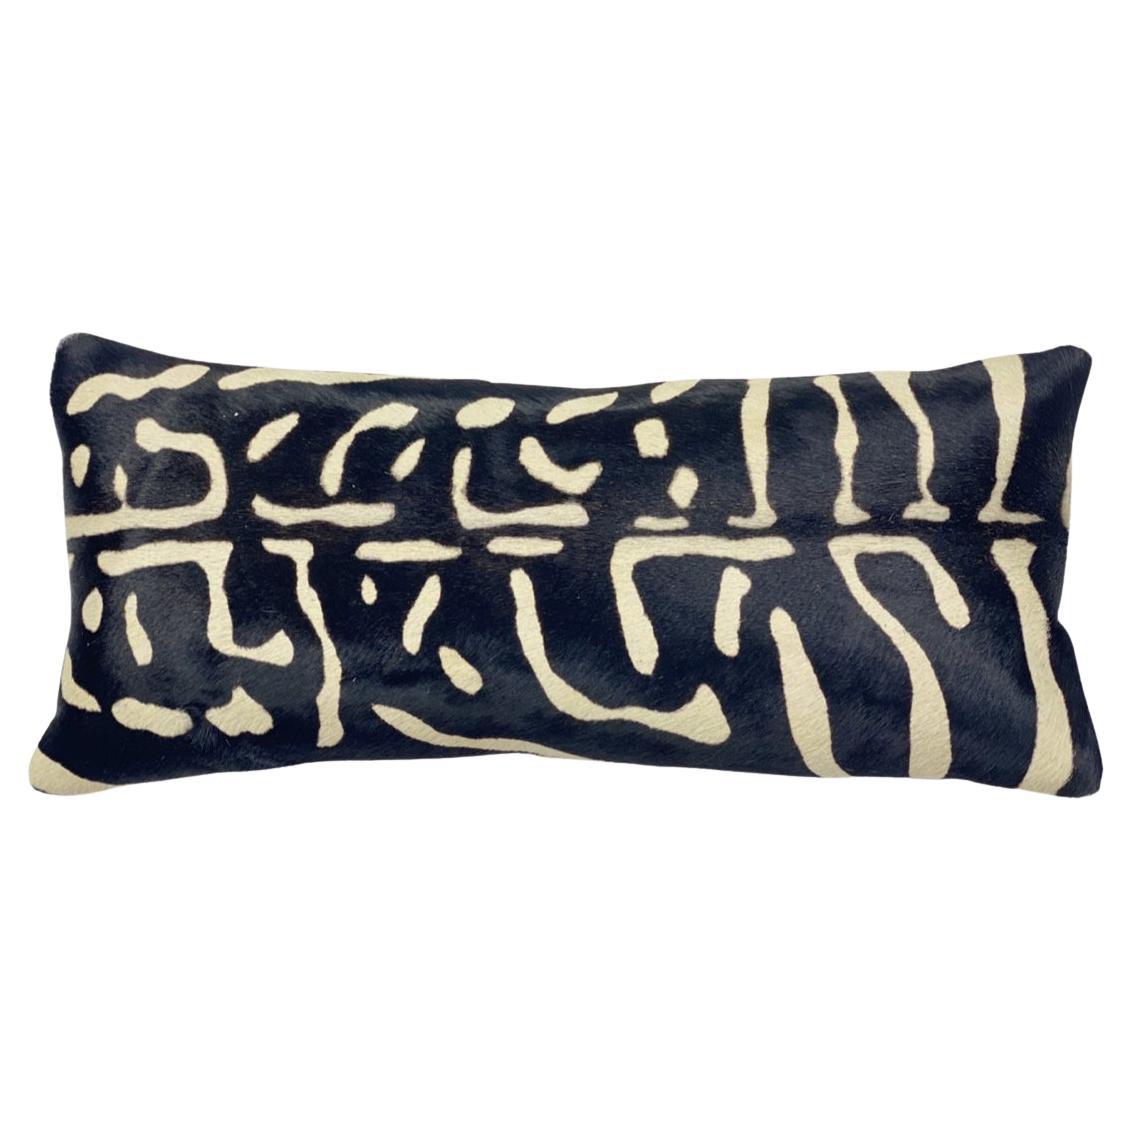 Black and White Abstract Pillow, Cowhide